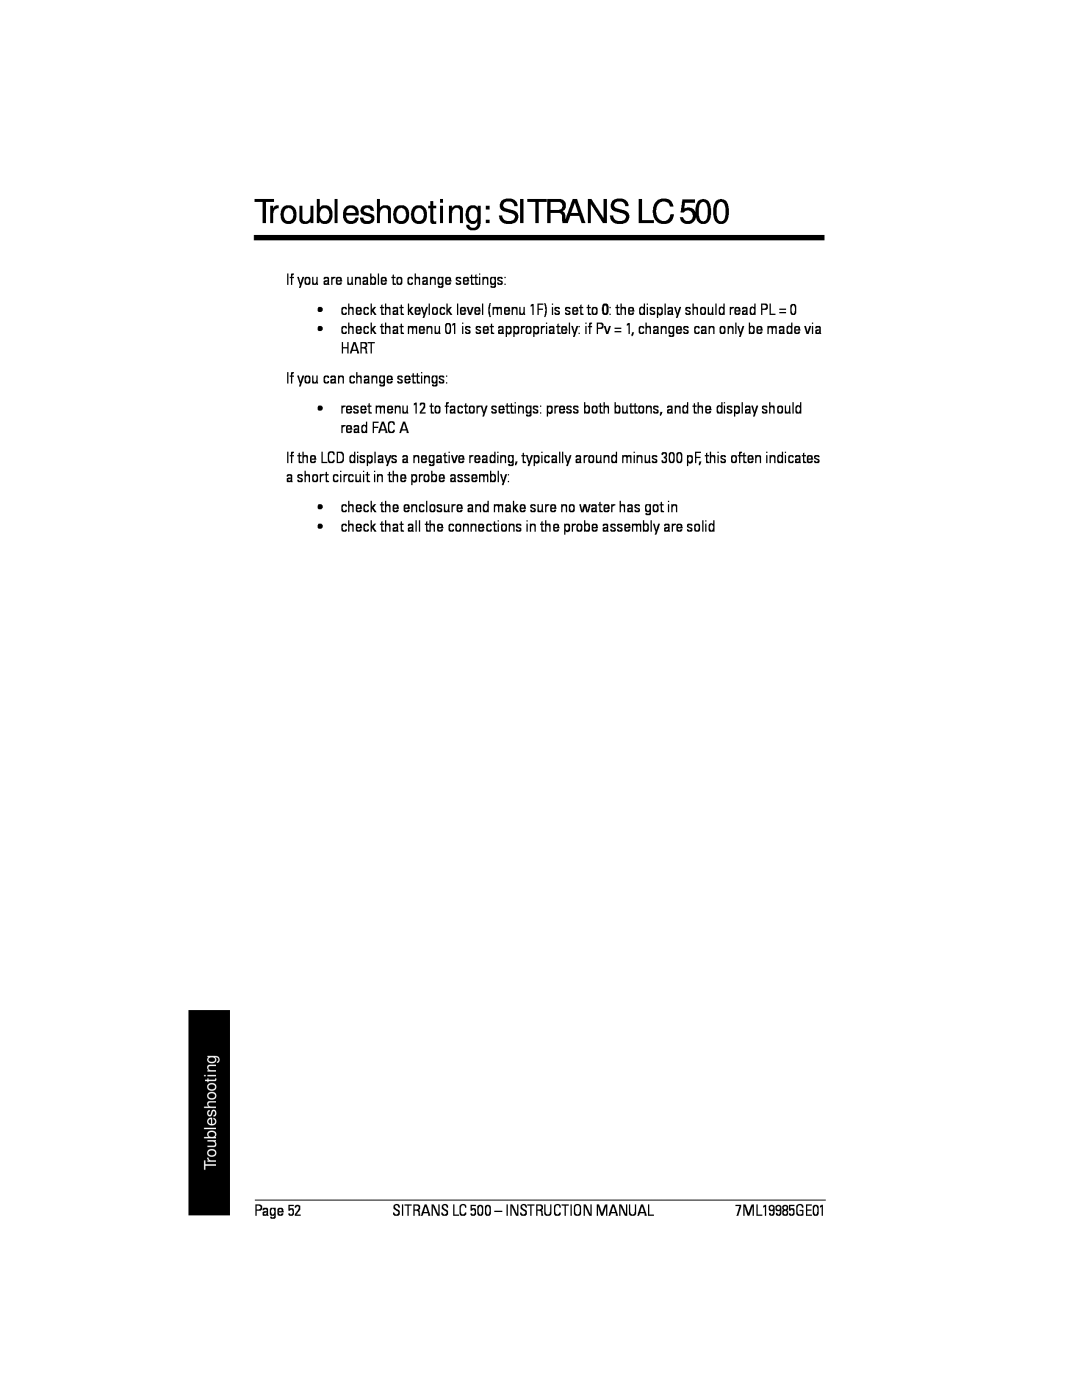 Siemens LC 500, Sitrans instruction manual Troubleshooting SITRANS LC 